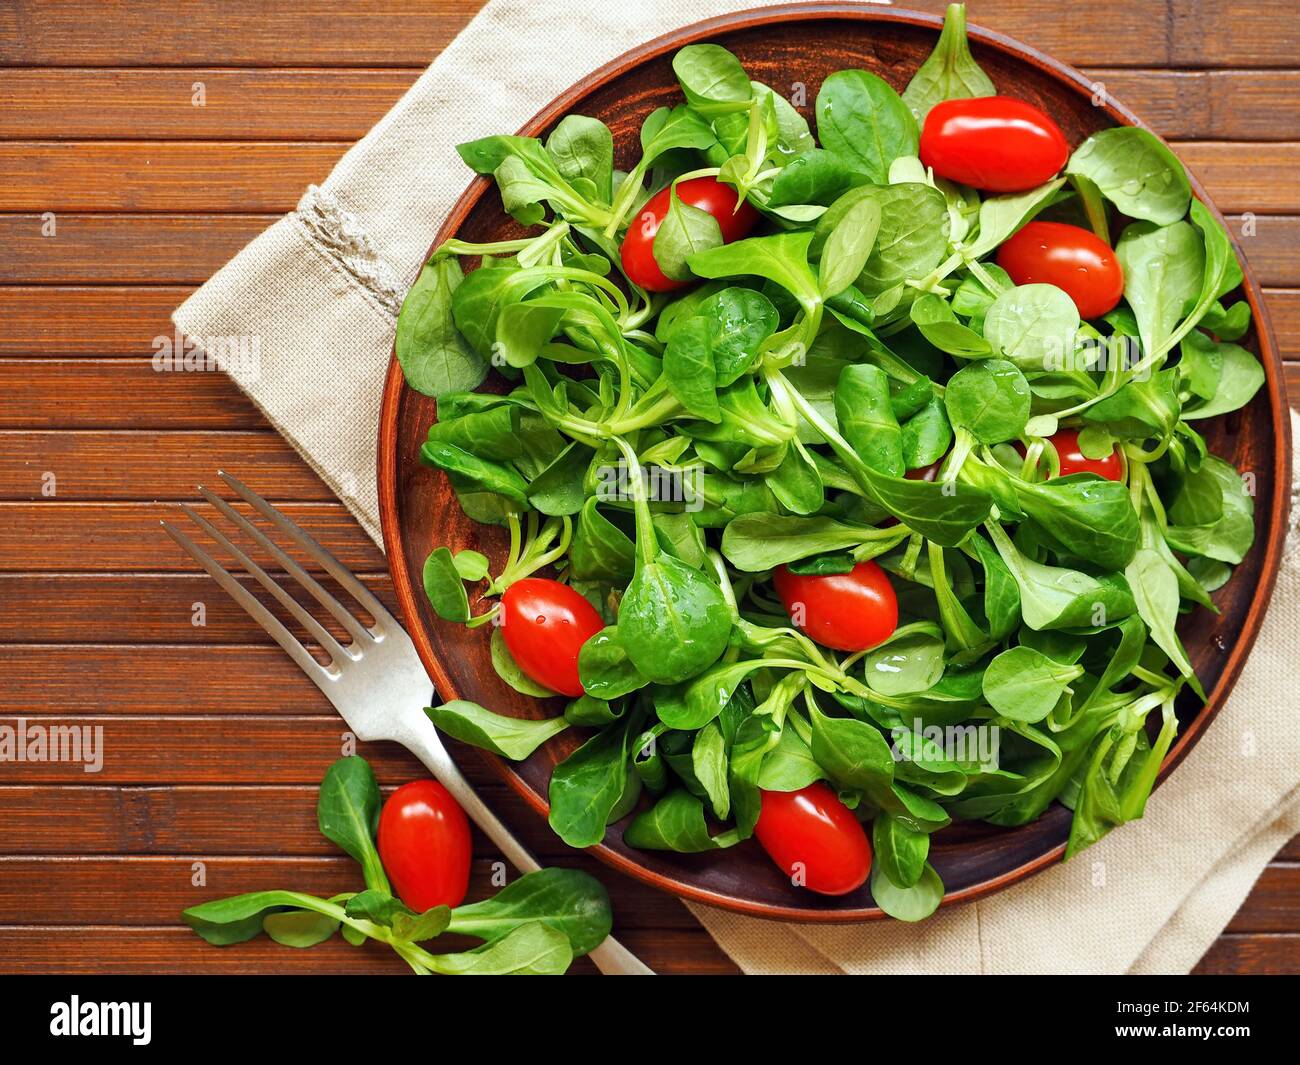 Wooden bowl with corn salad, lamb's lettuce and cherry tomatoes Stock Photo